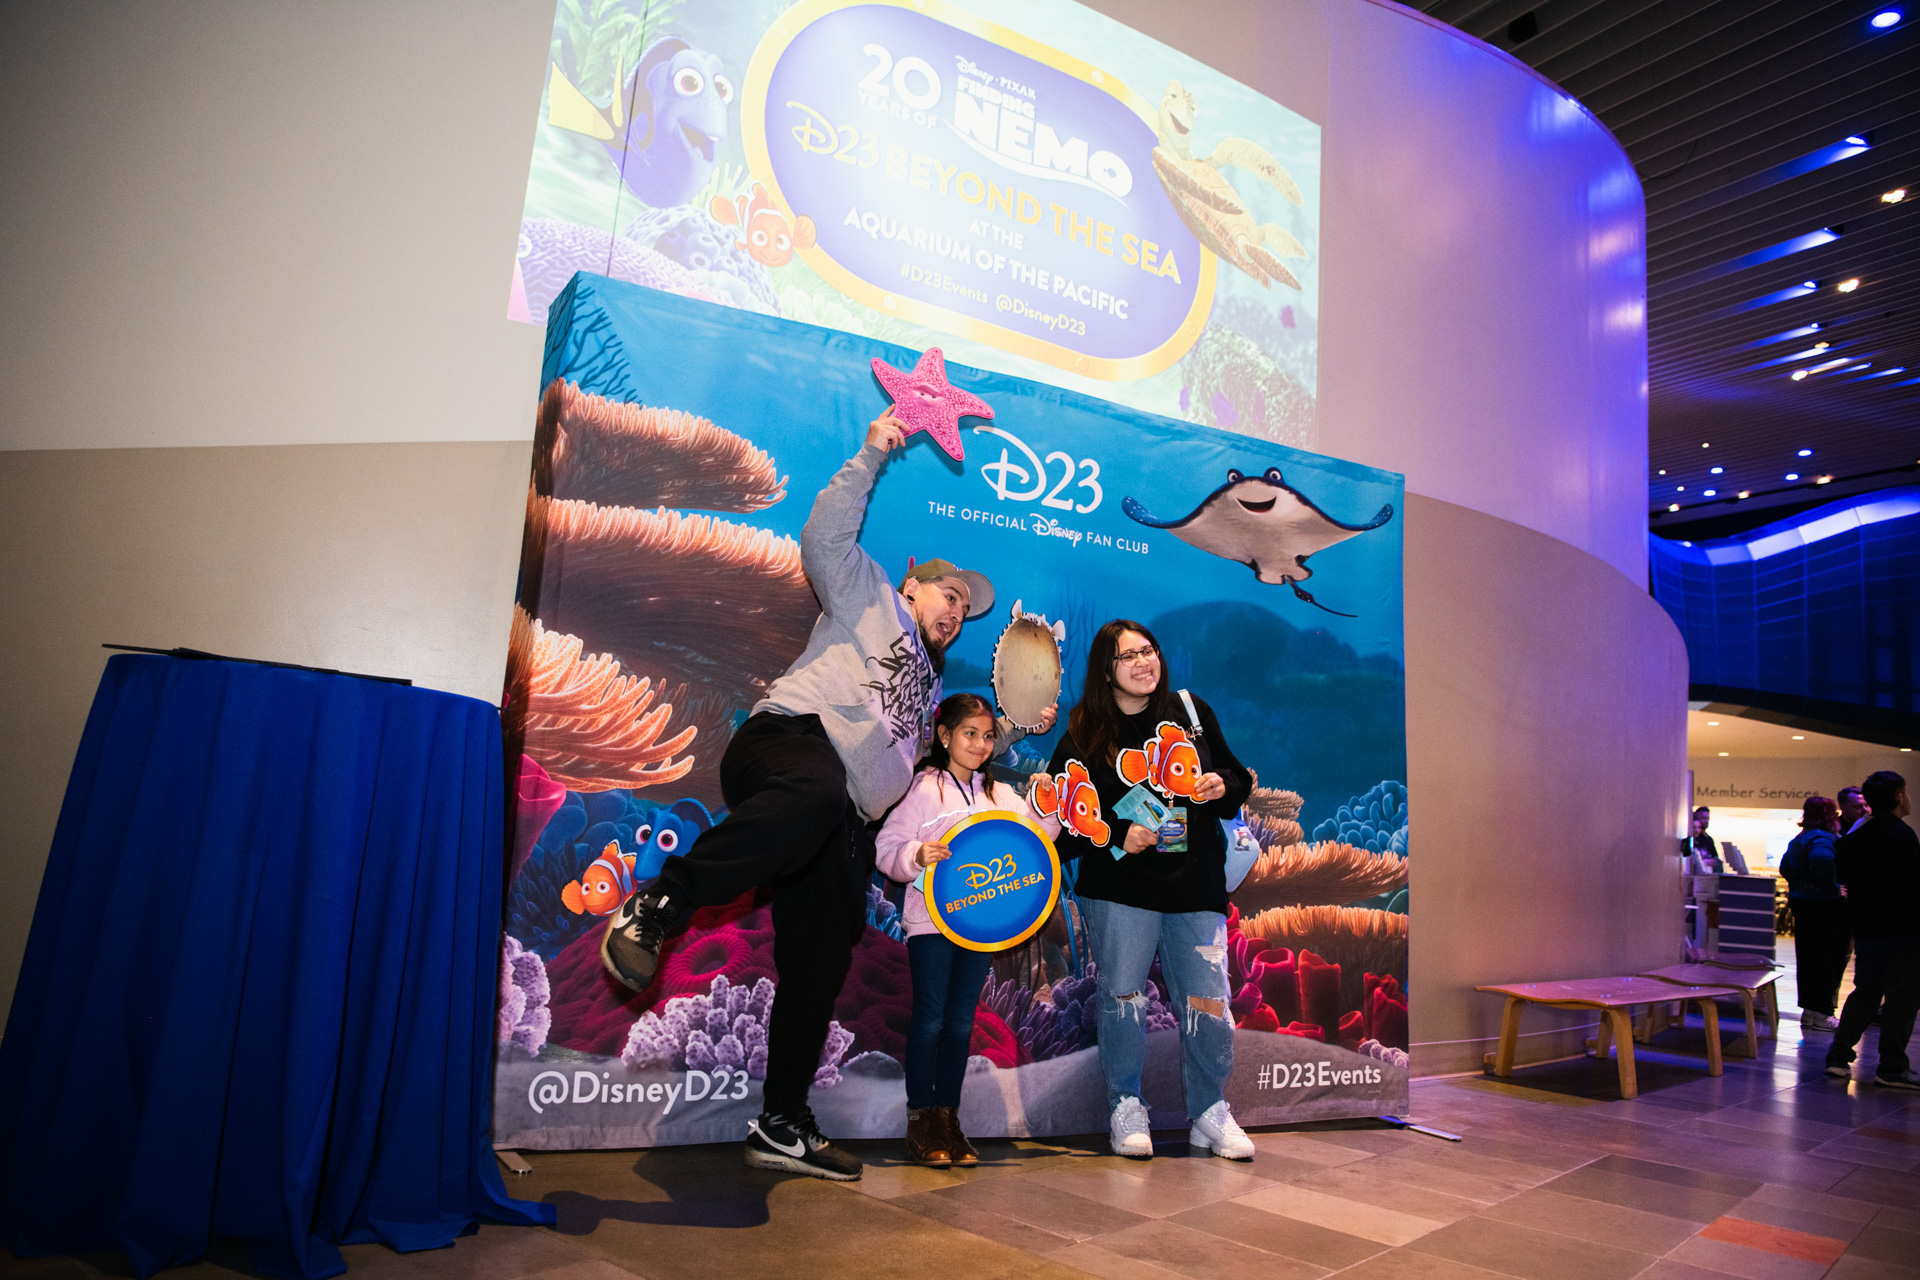 D23 Members smile and pose in front of a special photo opportunity that features characters from the movie, including Marlin and Dory.